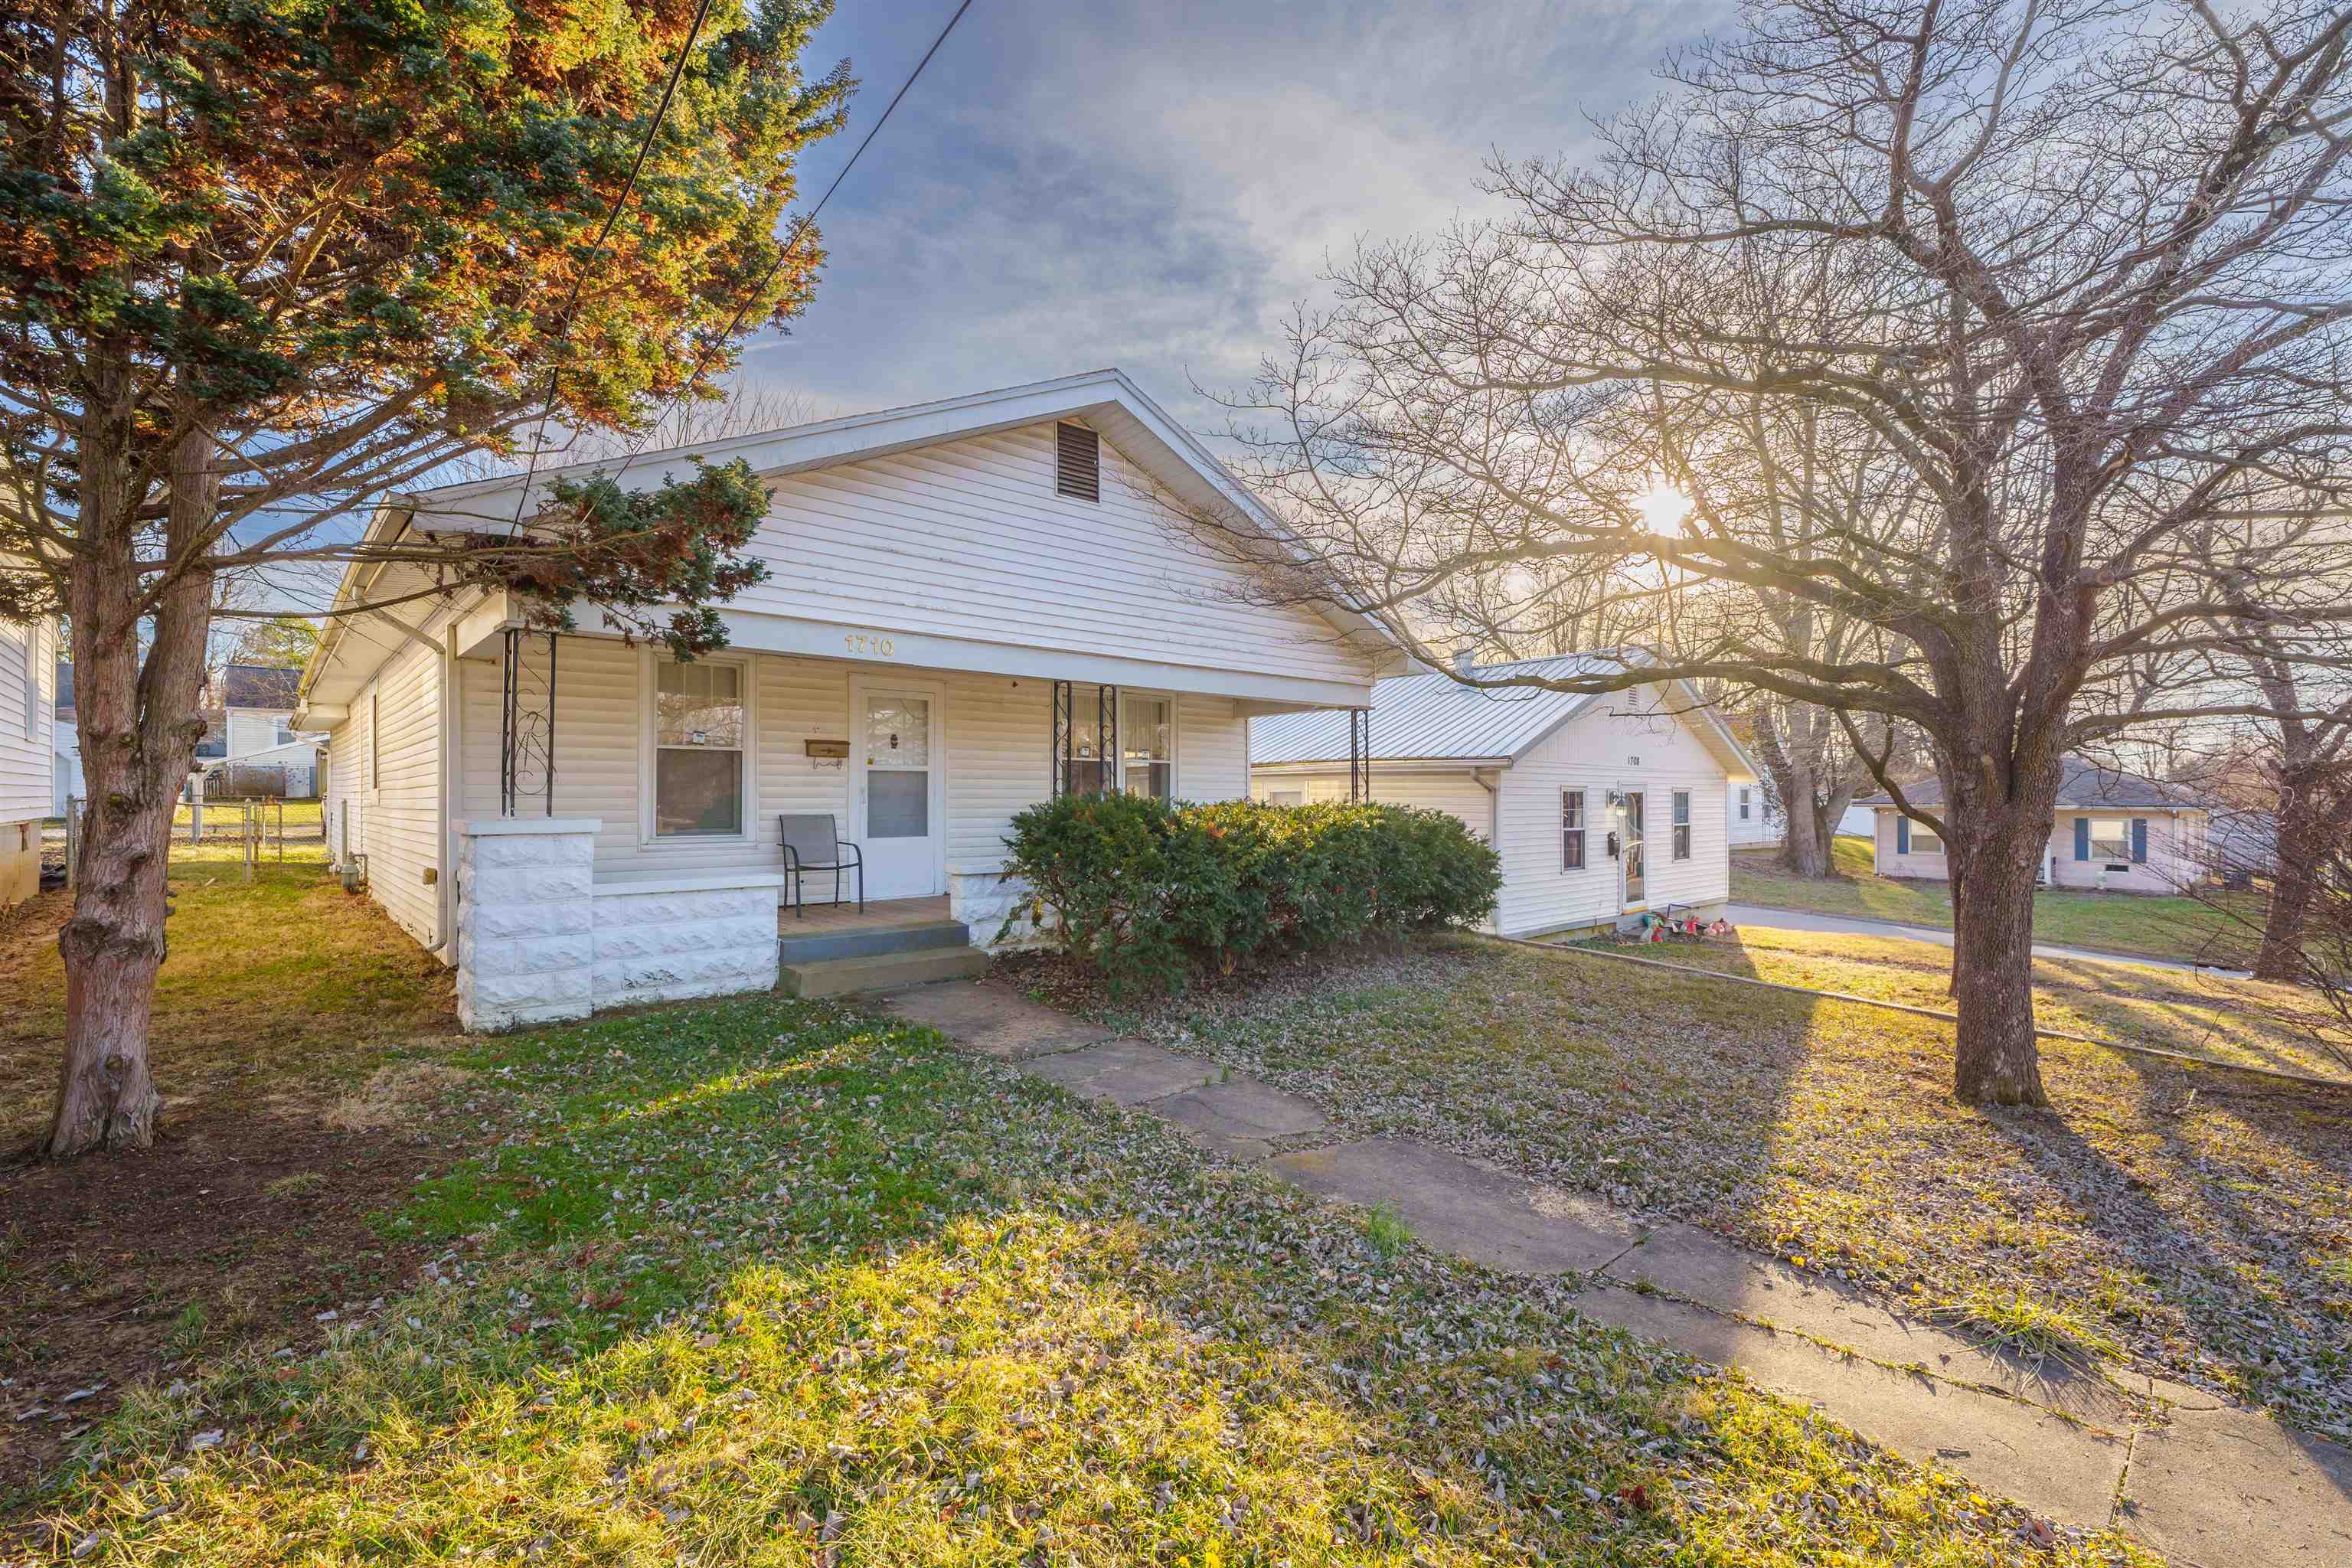 1710 E 21st St, Owensboro, Kentucky 42303, 3 Bedrooms Bedrooms, ,1 BathroomBathrooms,Single Family Residence,For Sale,E 21st St,88876